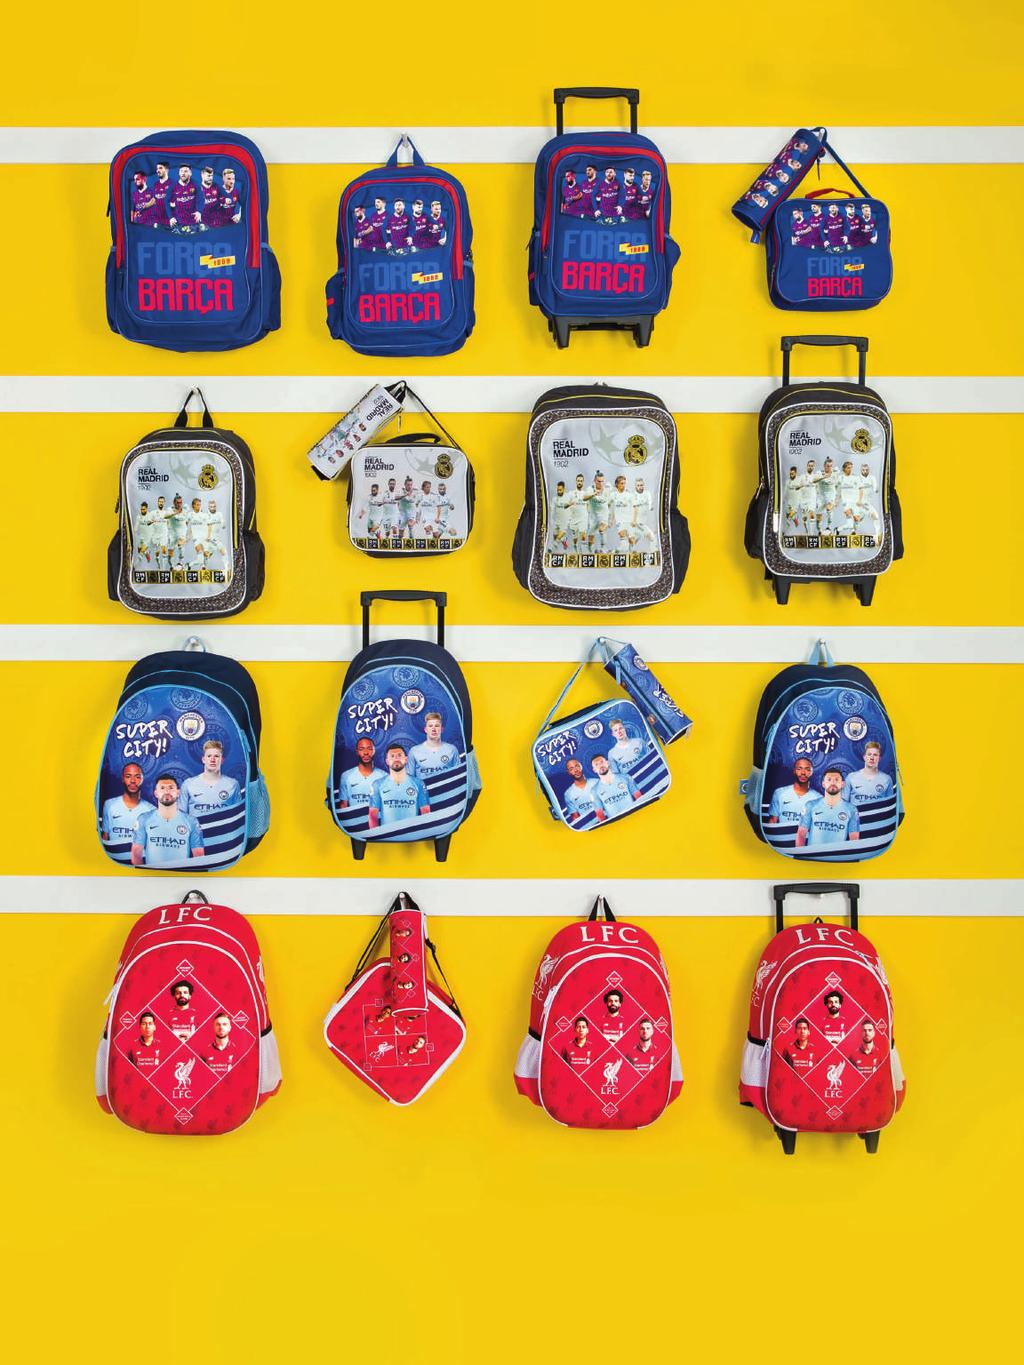 BARCELONA COLLECTION 18 Backpack AED 175, 16 Backpack AED 115, 16 Trolley Backpack AED 199, Pencil Pouch AED 27, Lunch Bag AED 69, REAL MADRID COLLECTION 16 Backpack AED 115, Pencil Pouch AED 27,